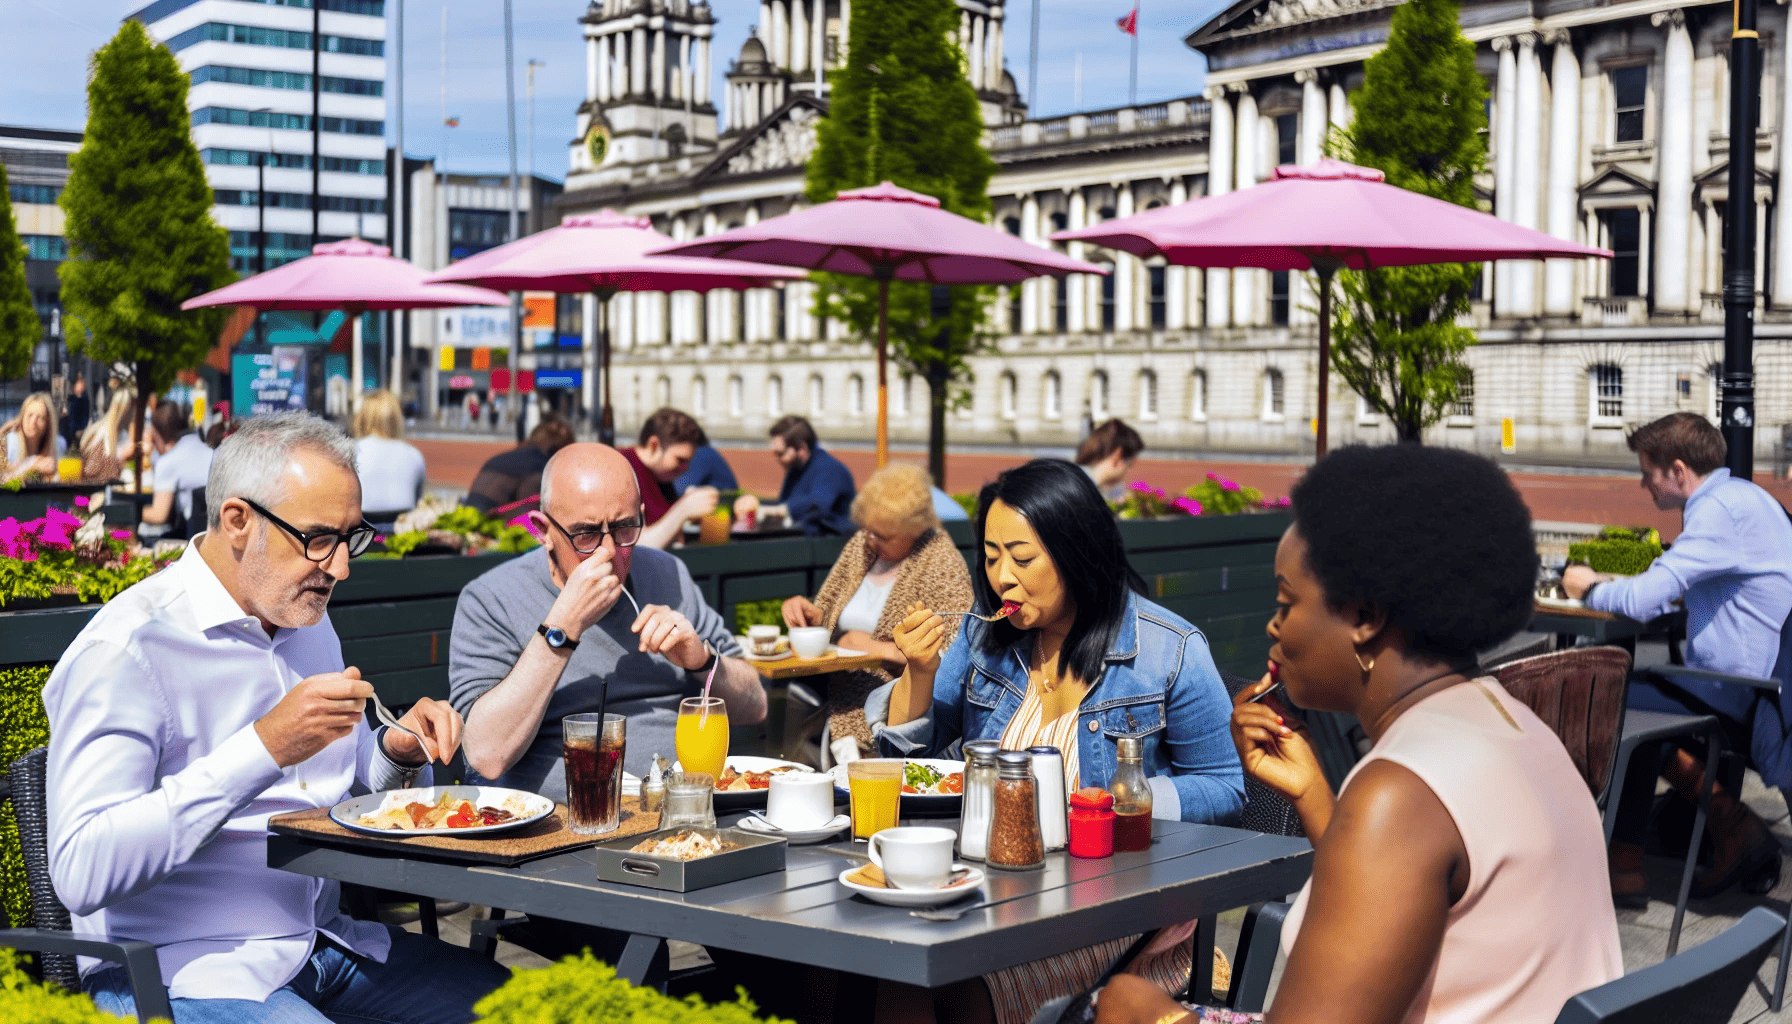 A vibrant brunch scene in Belfast city centre with delicious brunch dishes